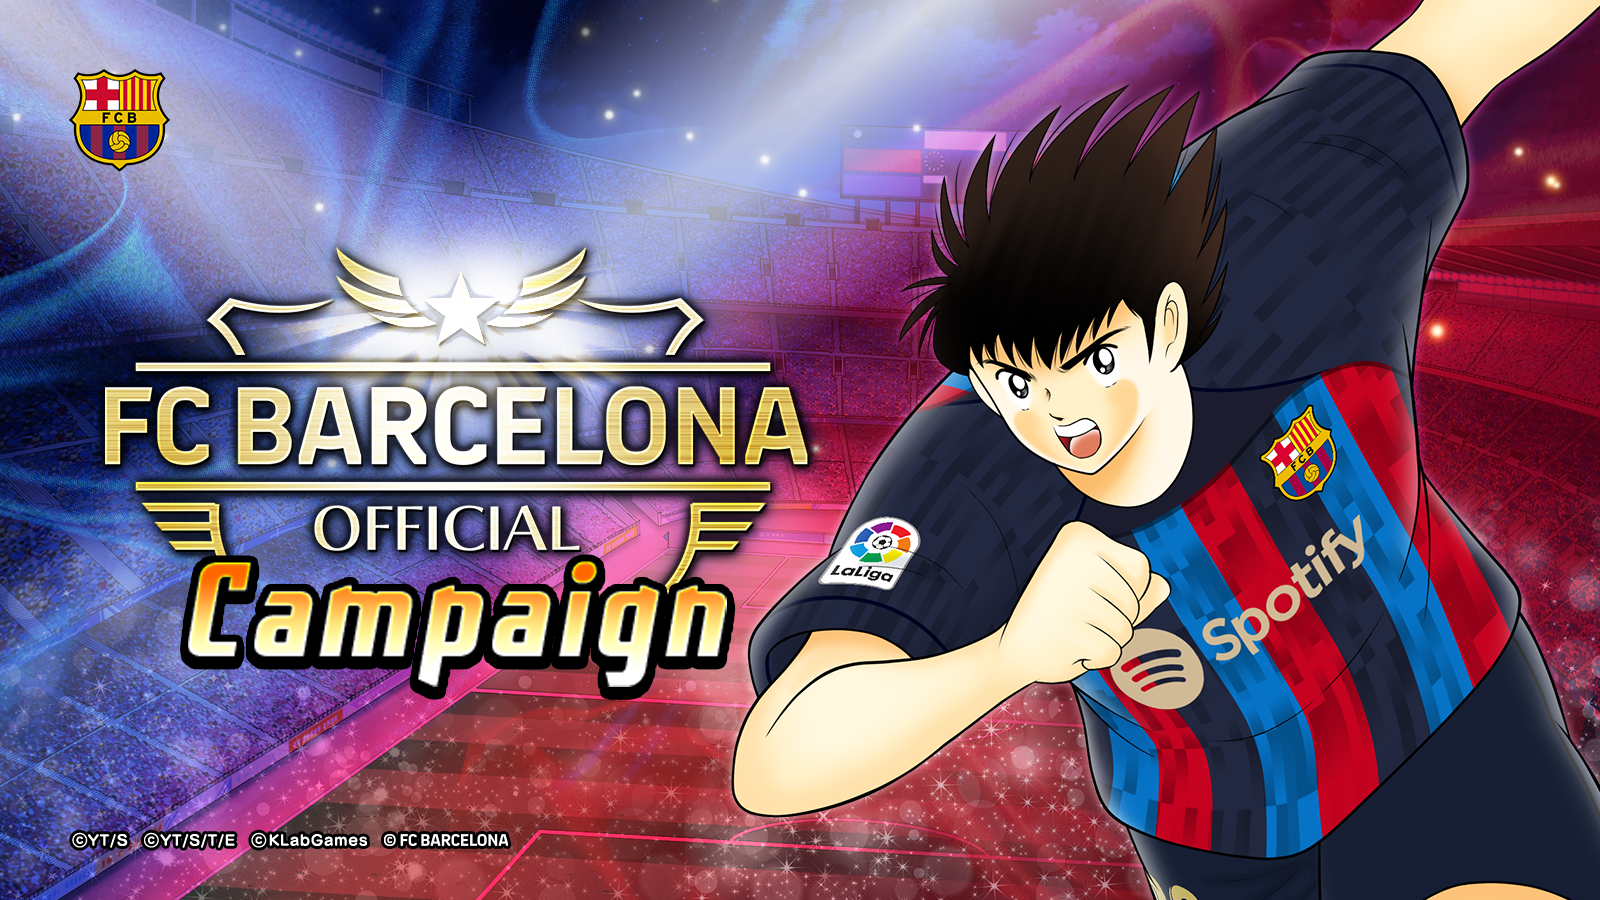 Captain Tsubasa: Dream Team Debuts New Players Tsubasa Ozora, Xavii and  Payol Wearing the FC BARCELONA Official Uniform! Monthly  Livestream  Begins March 30th!, News